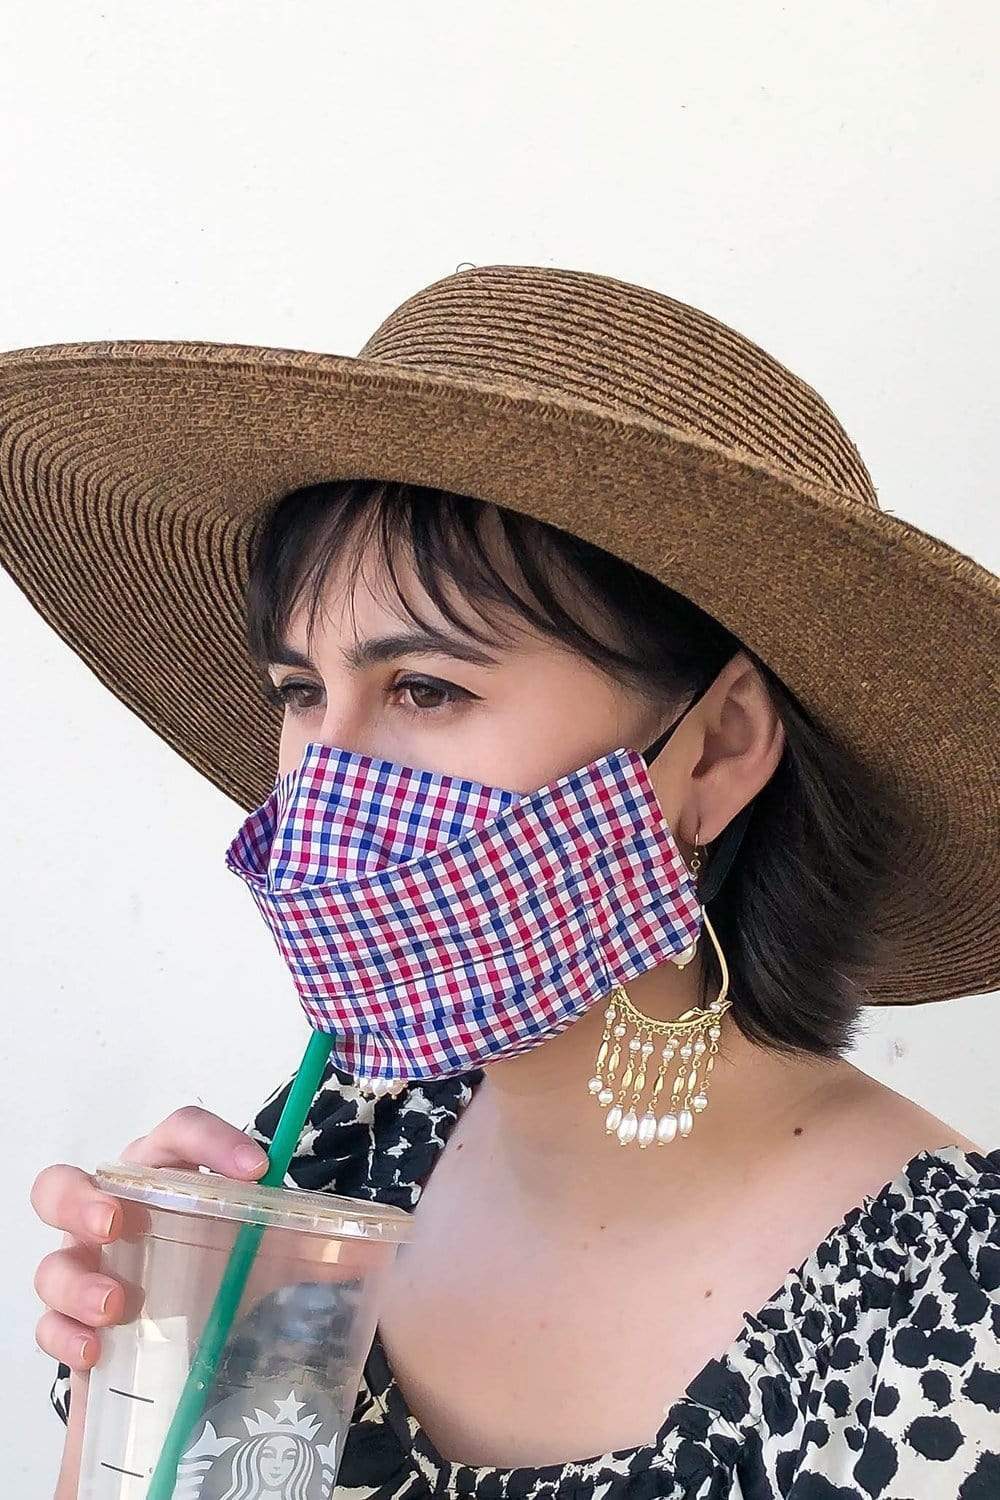 Safely Sip Face Masks Safely Sip Mask in Rainbow Floral Print - Chloe Dao